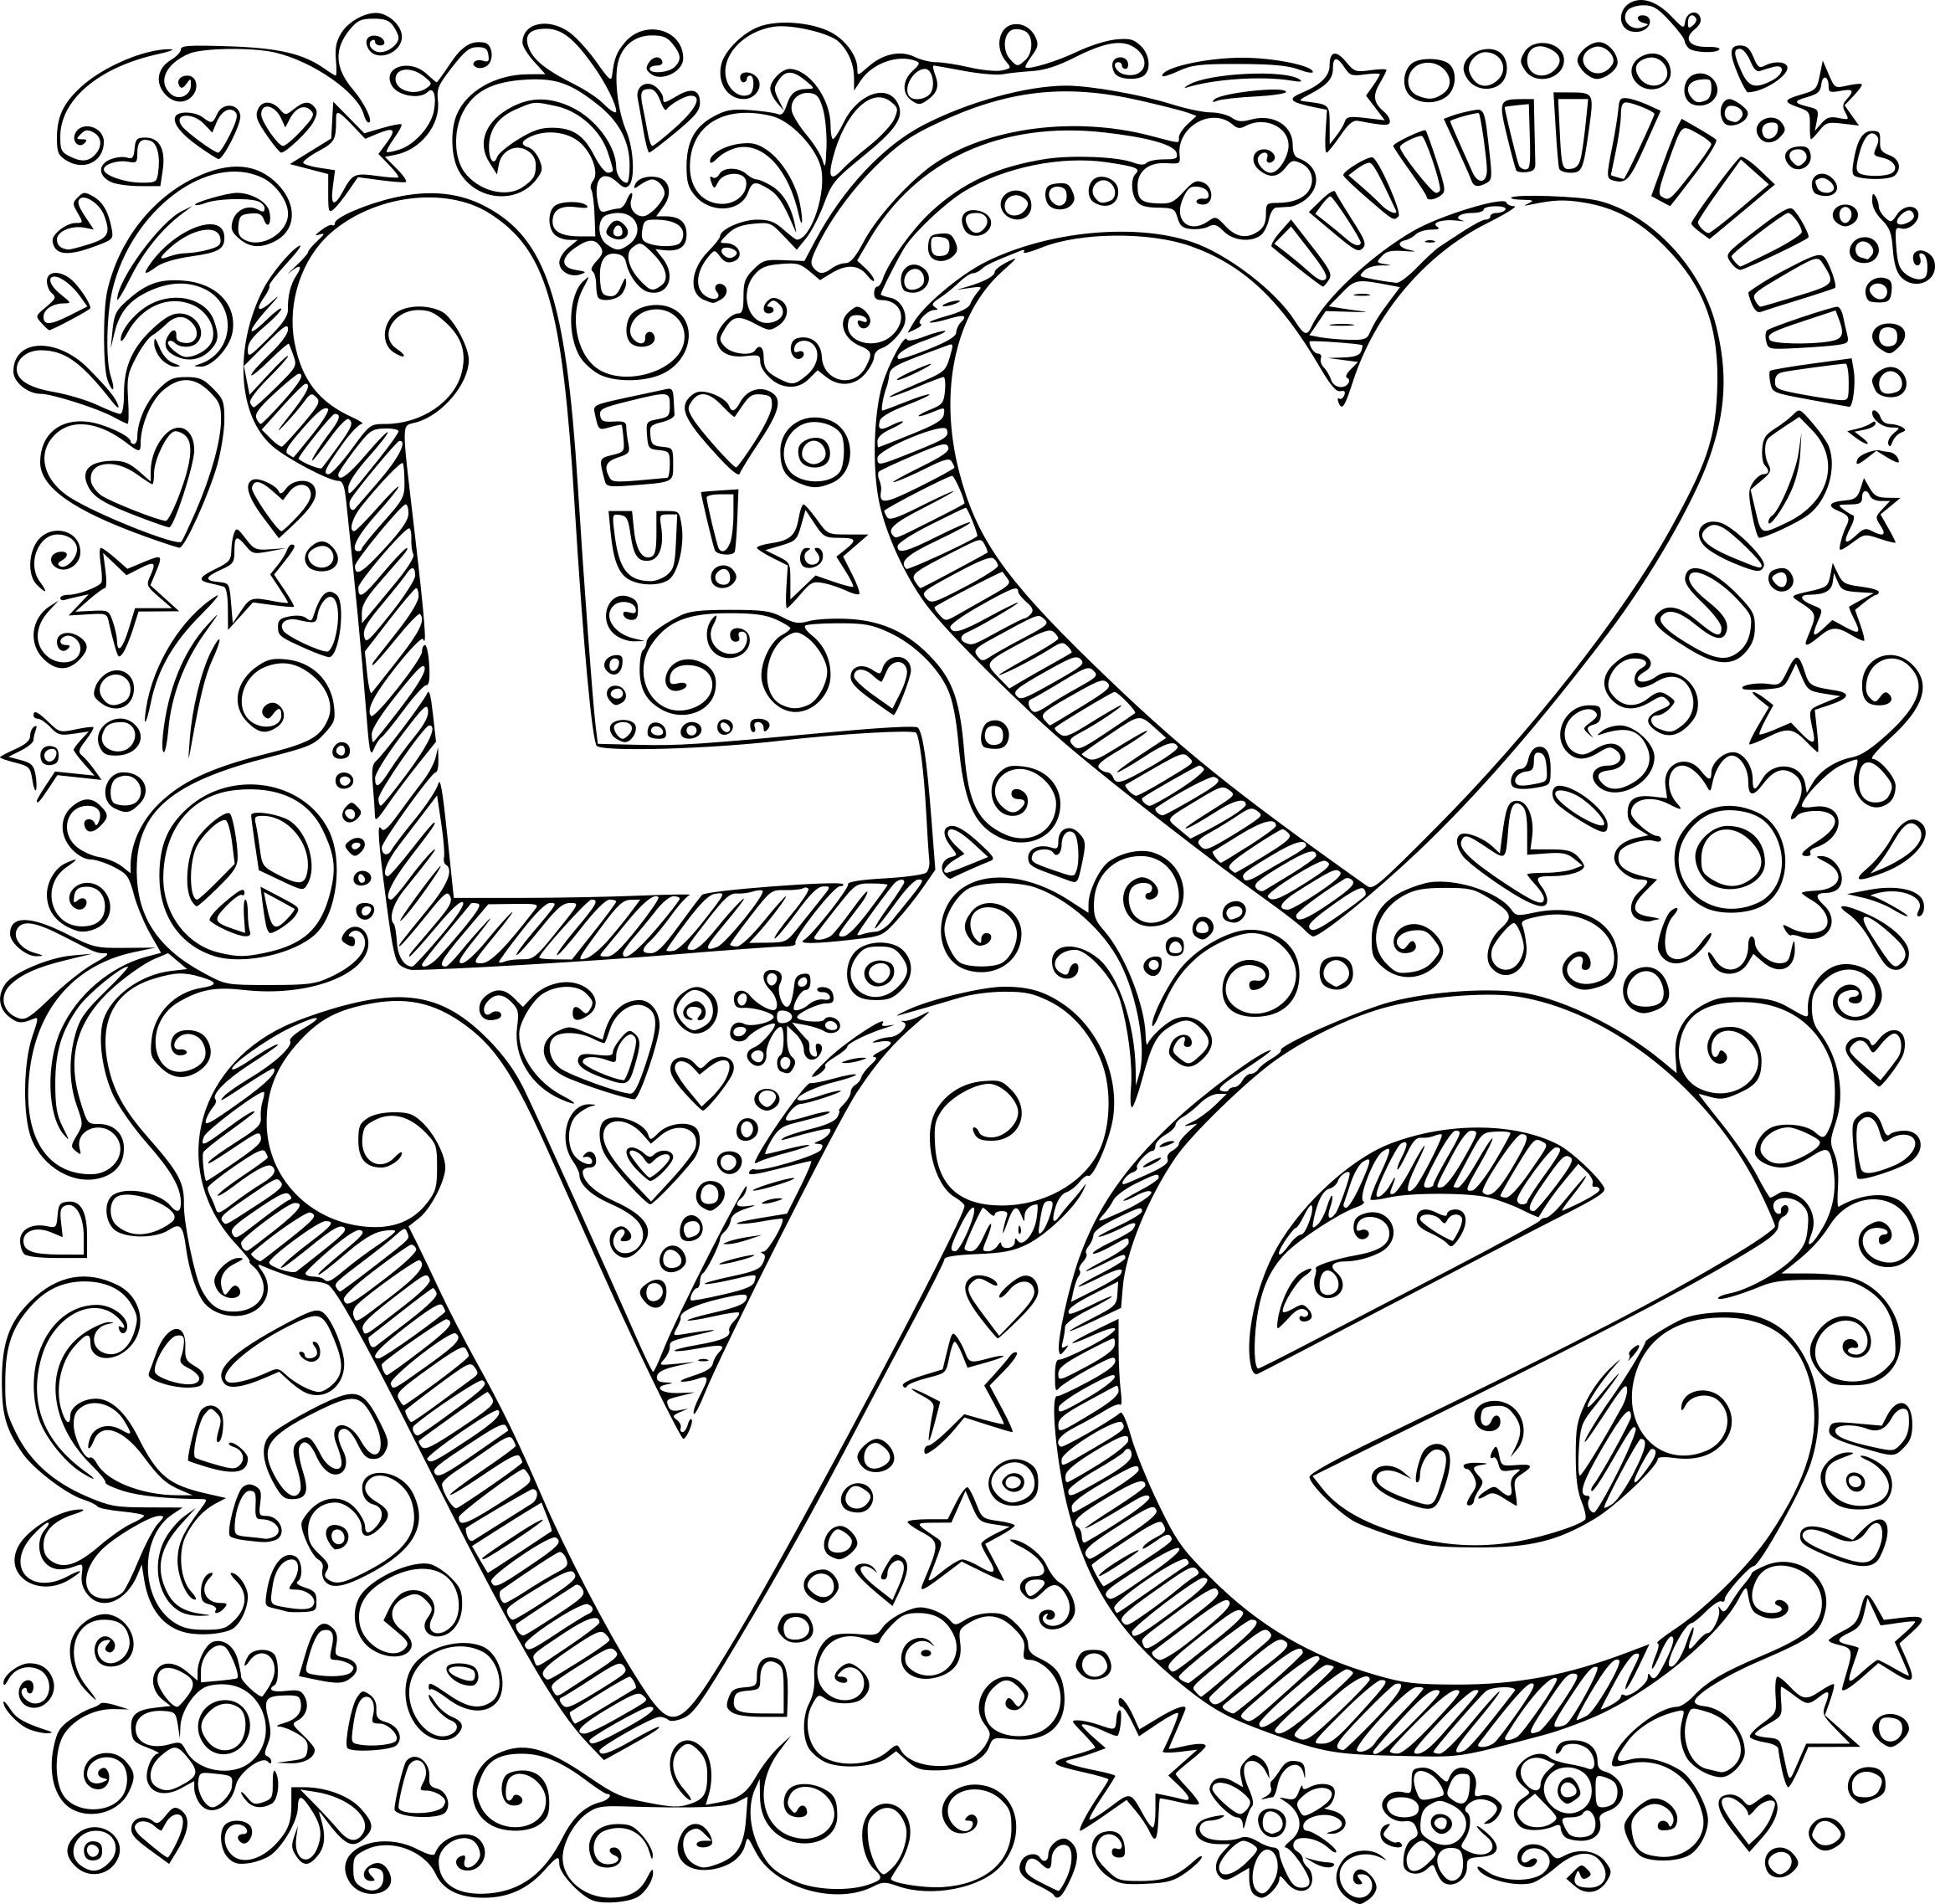 Anti Stress For Adults coloring page